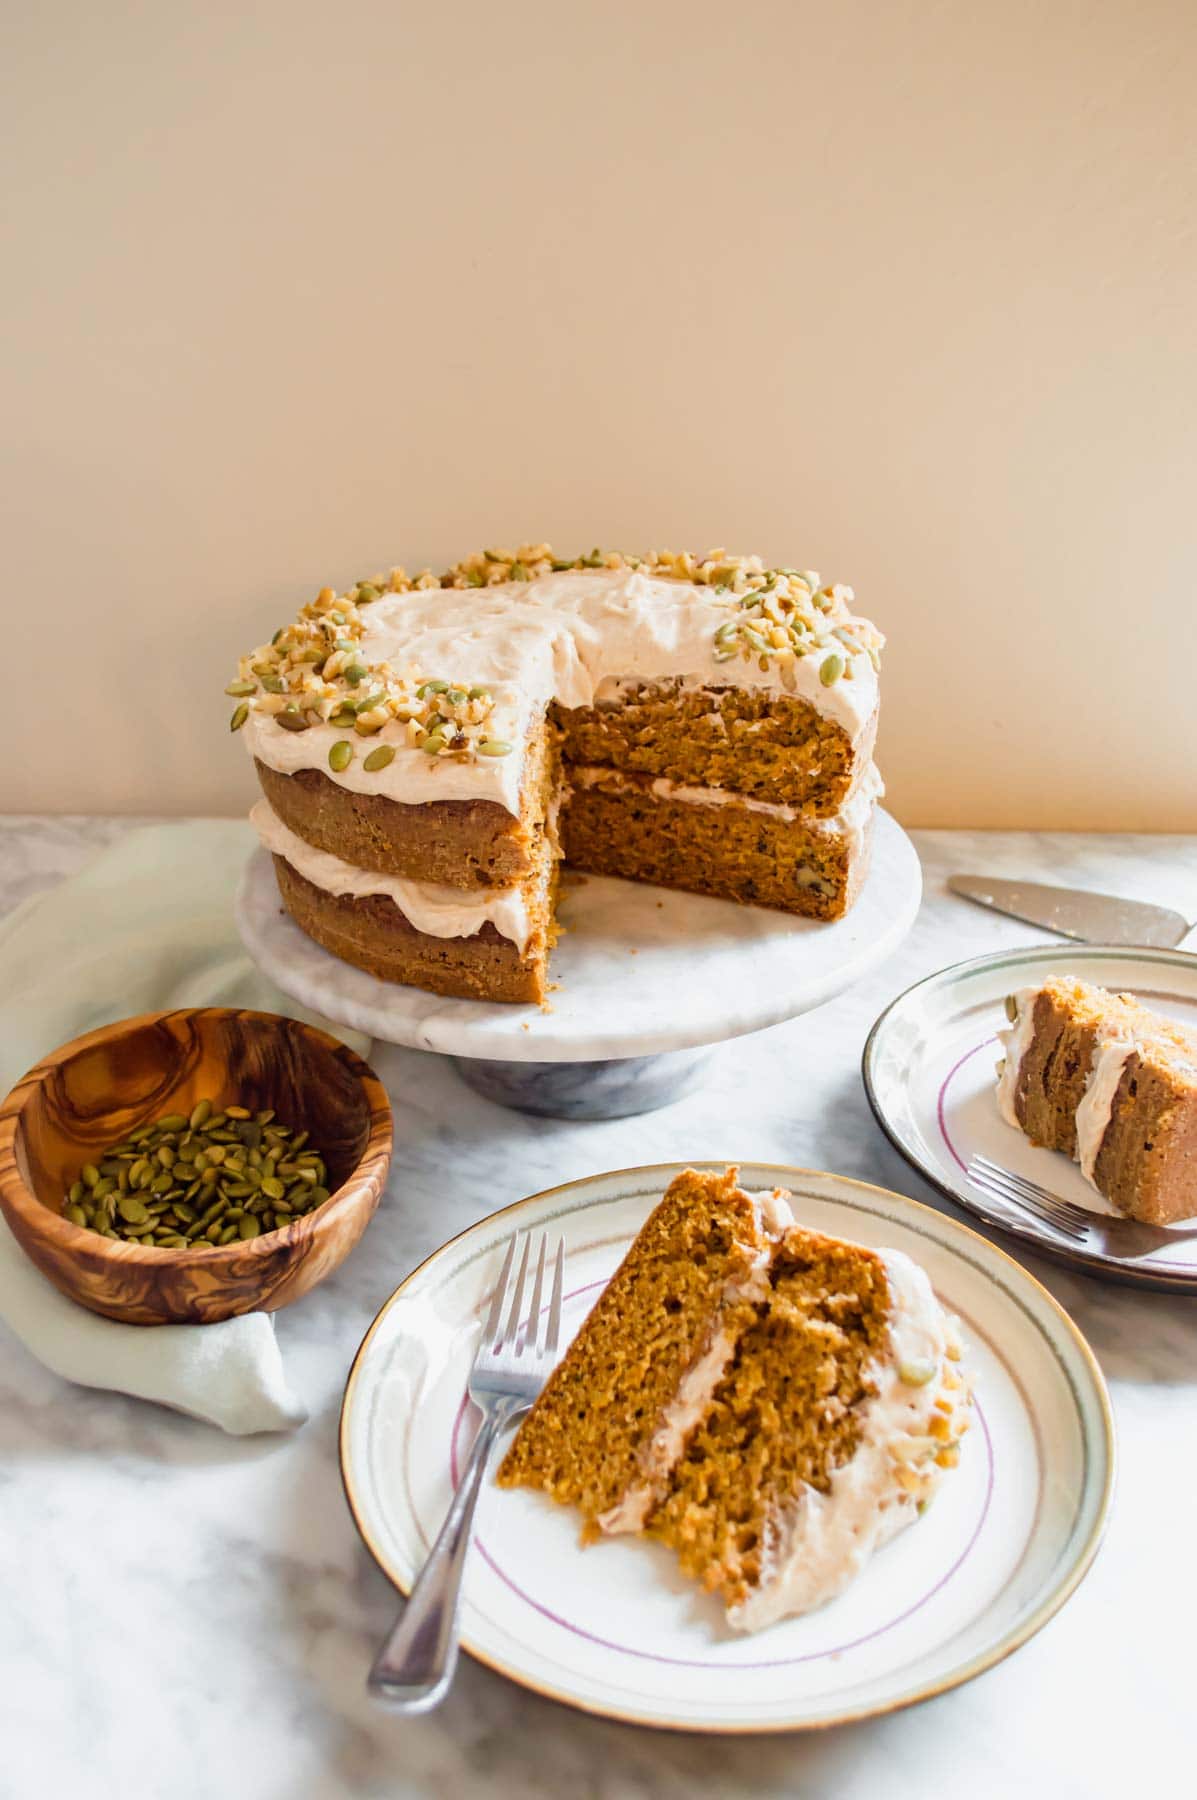 Slices of Carrot Cake with Chai Spiced Frosting with cake on cake stand and pepitas.